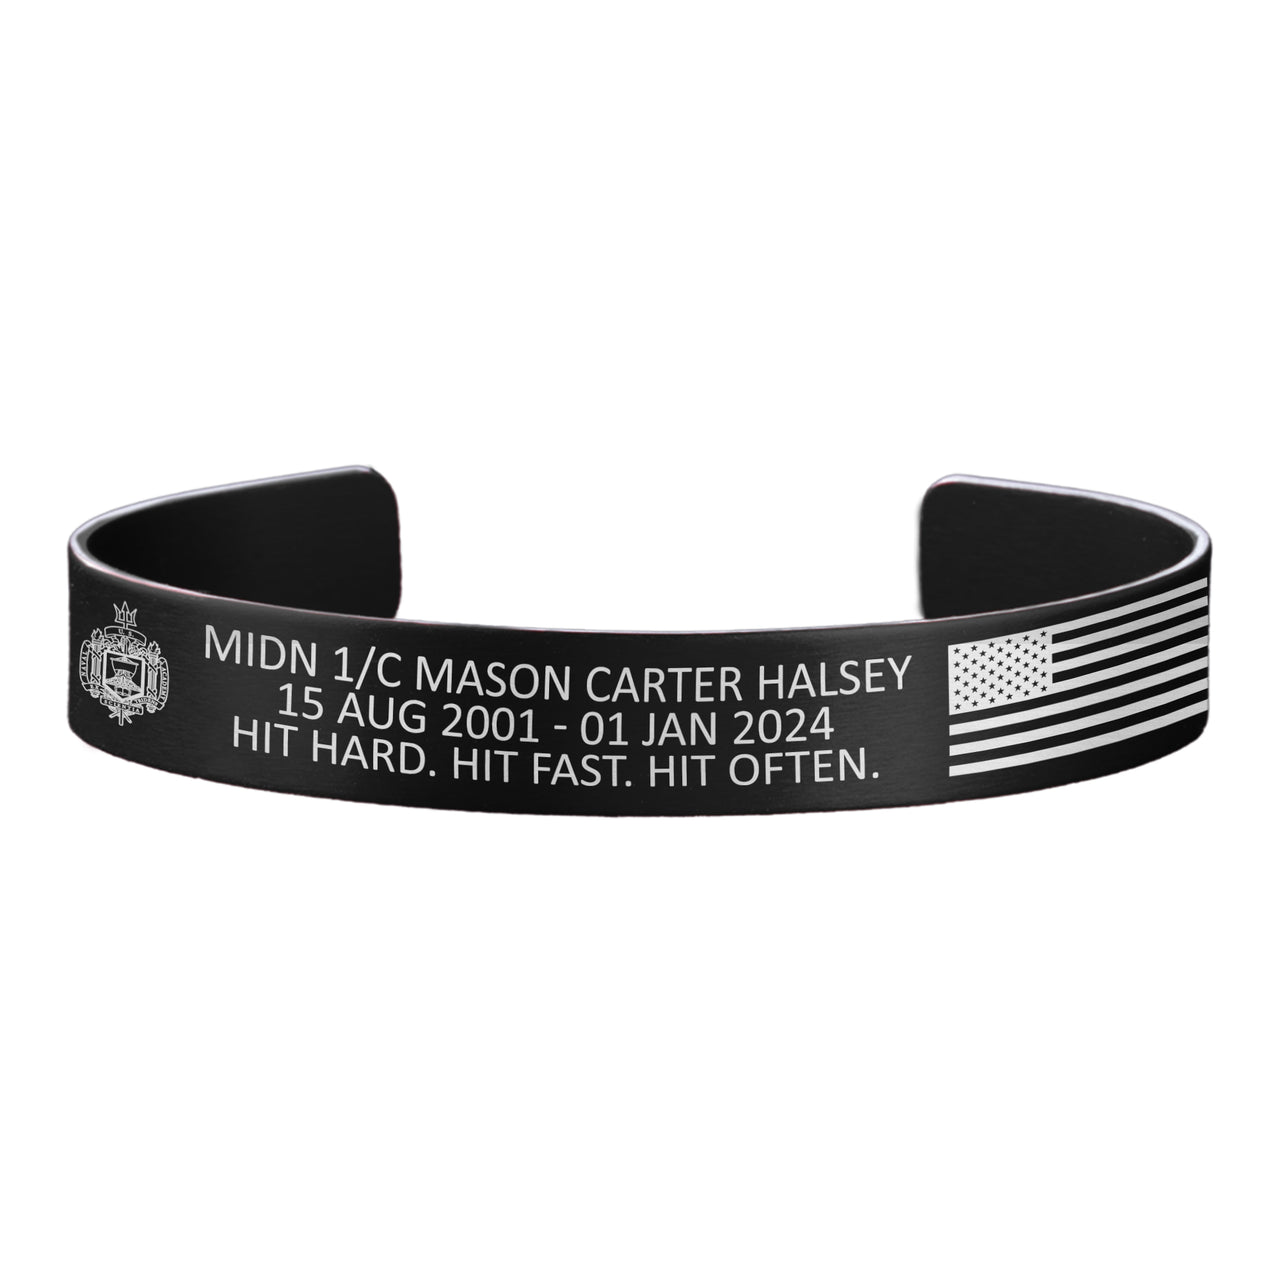 MIDN 1/C Mason Carter Halsey Memorial Band – Hosted by the Halsey Family